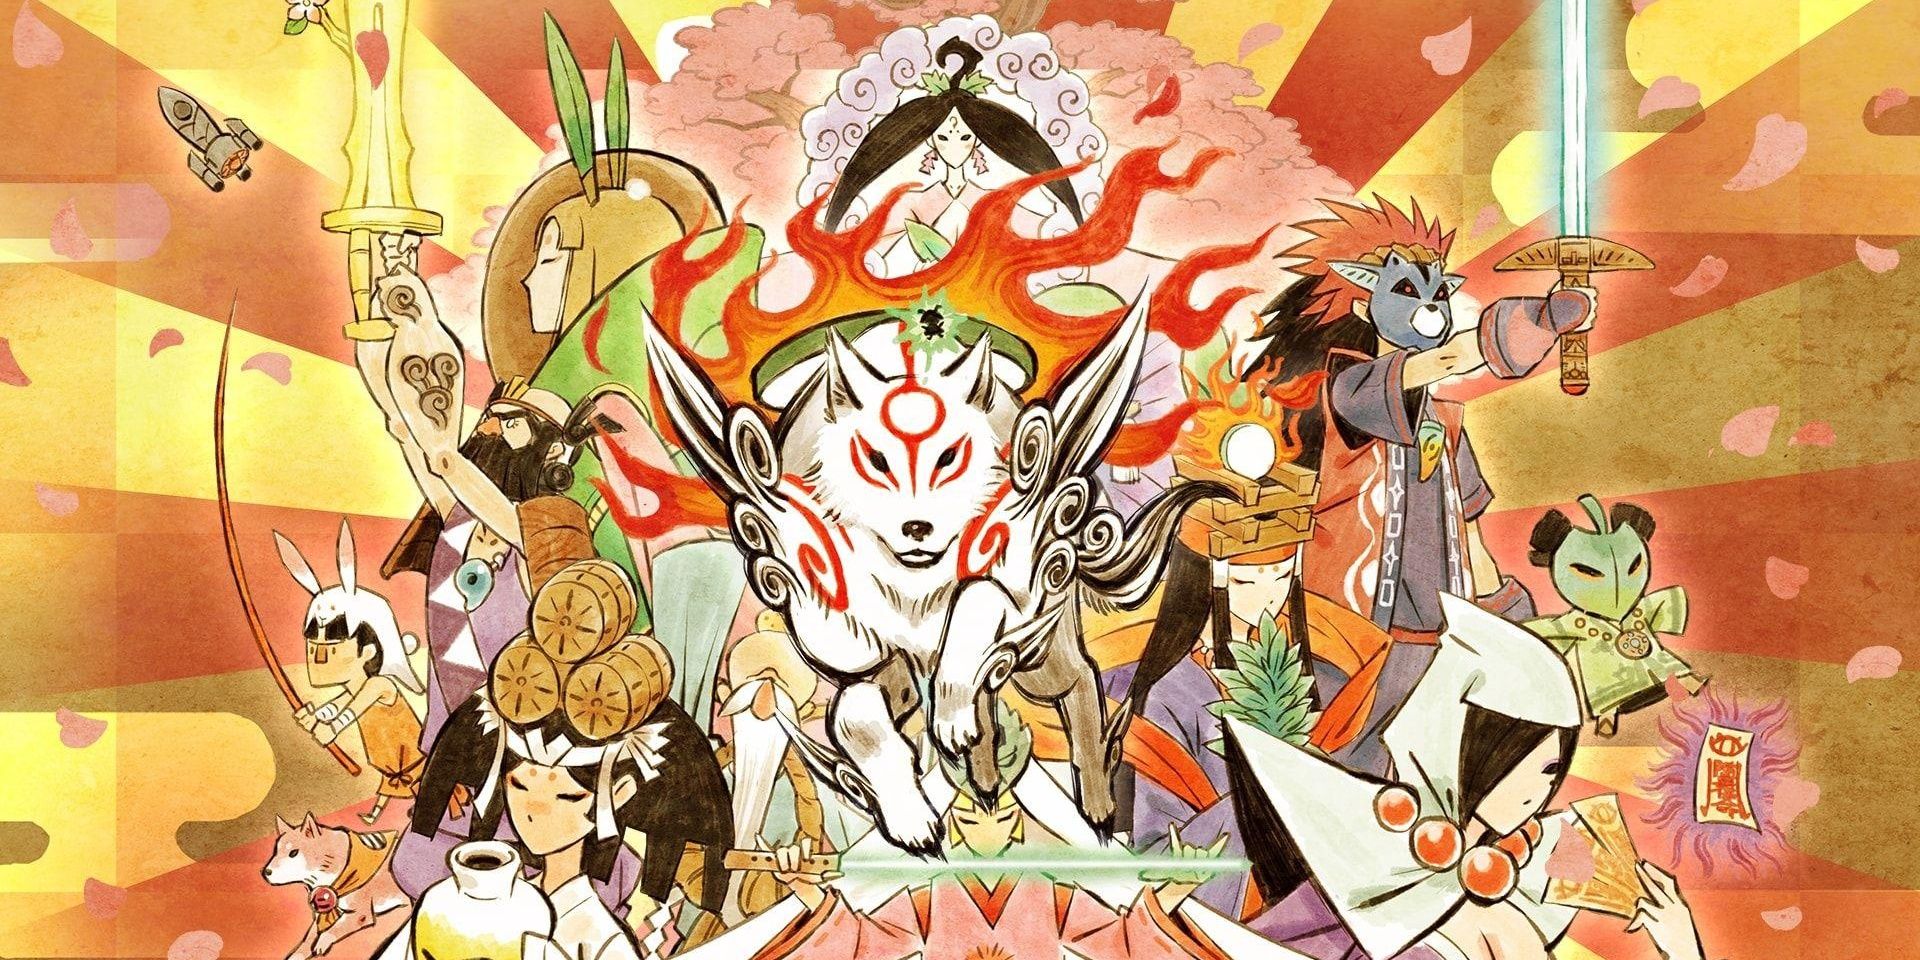 Okami art depicting Amaterasu at the center and the various people she meets along her journey surrounding her as a large stylized sun shines behind them all